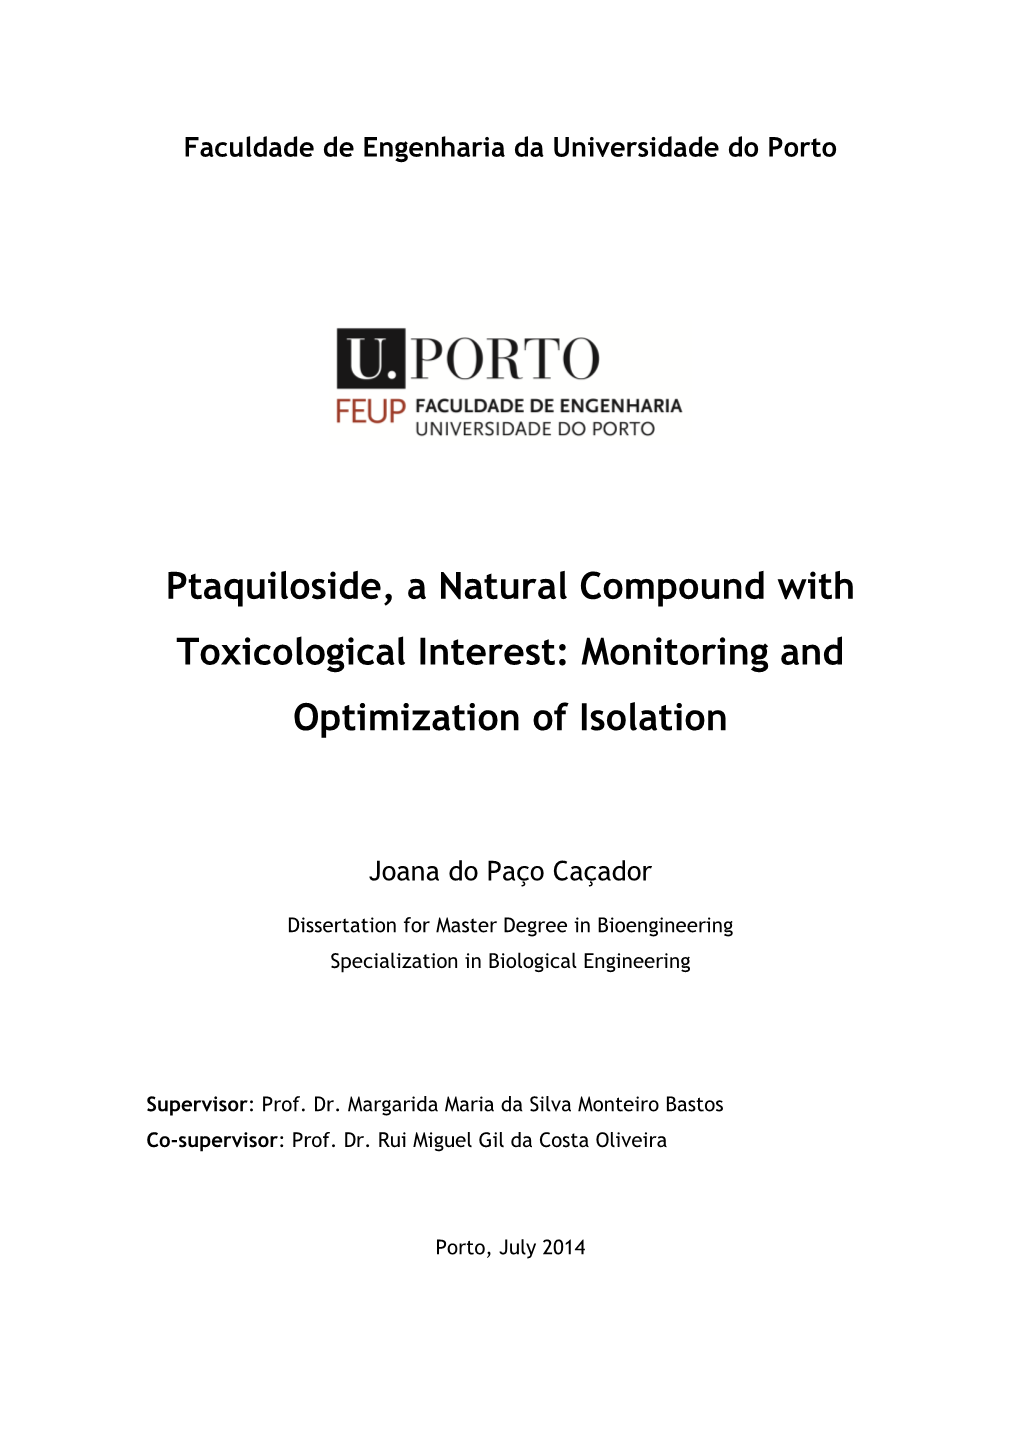 Ptaquiloside, a Natural Compound with Toxicological Interest: Monitoring and Optimization of Isolation